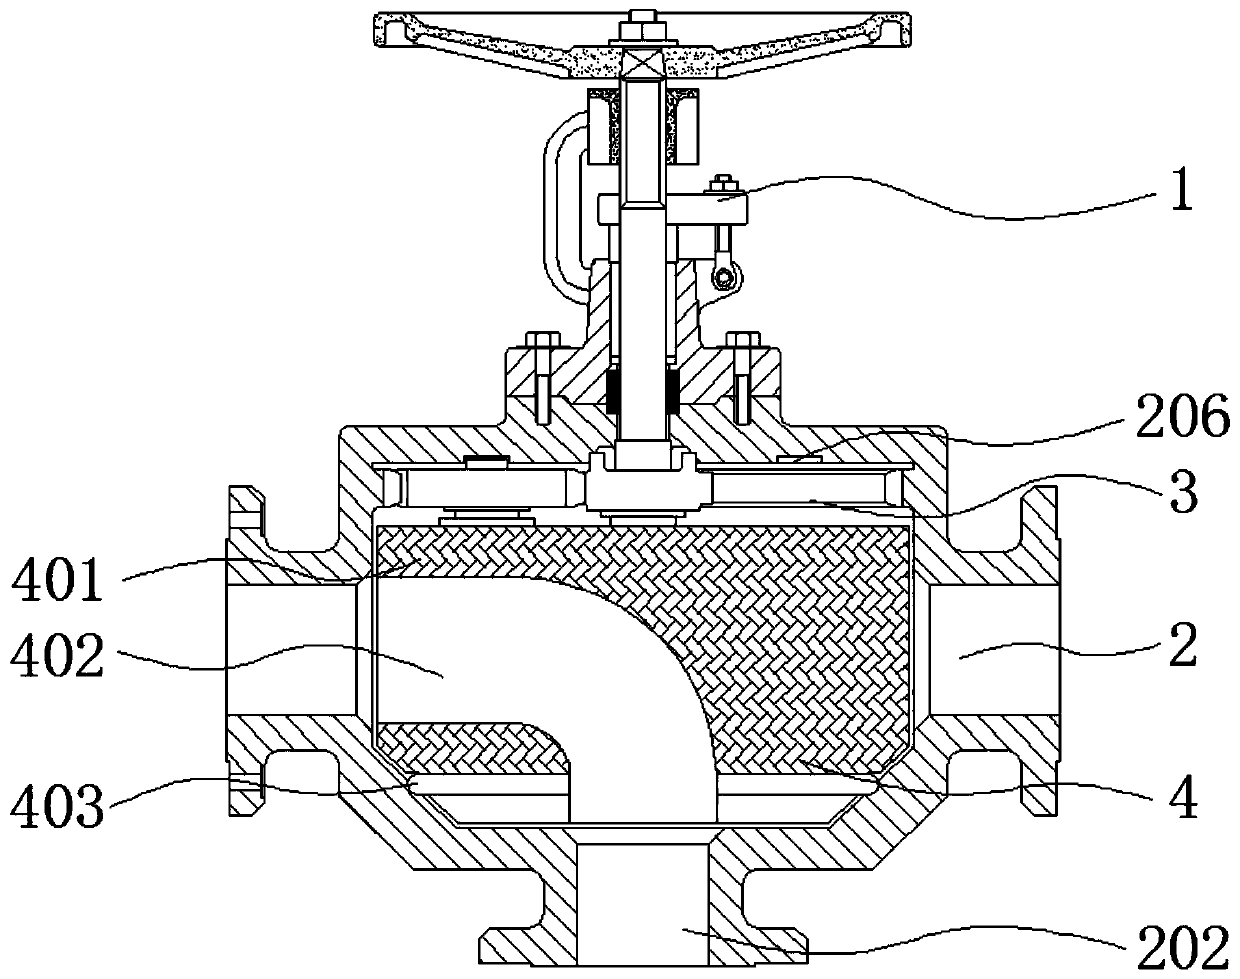 Valve capable of changing gas flow direction